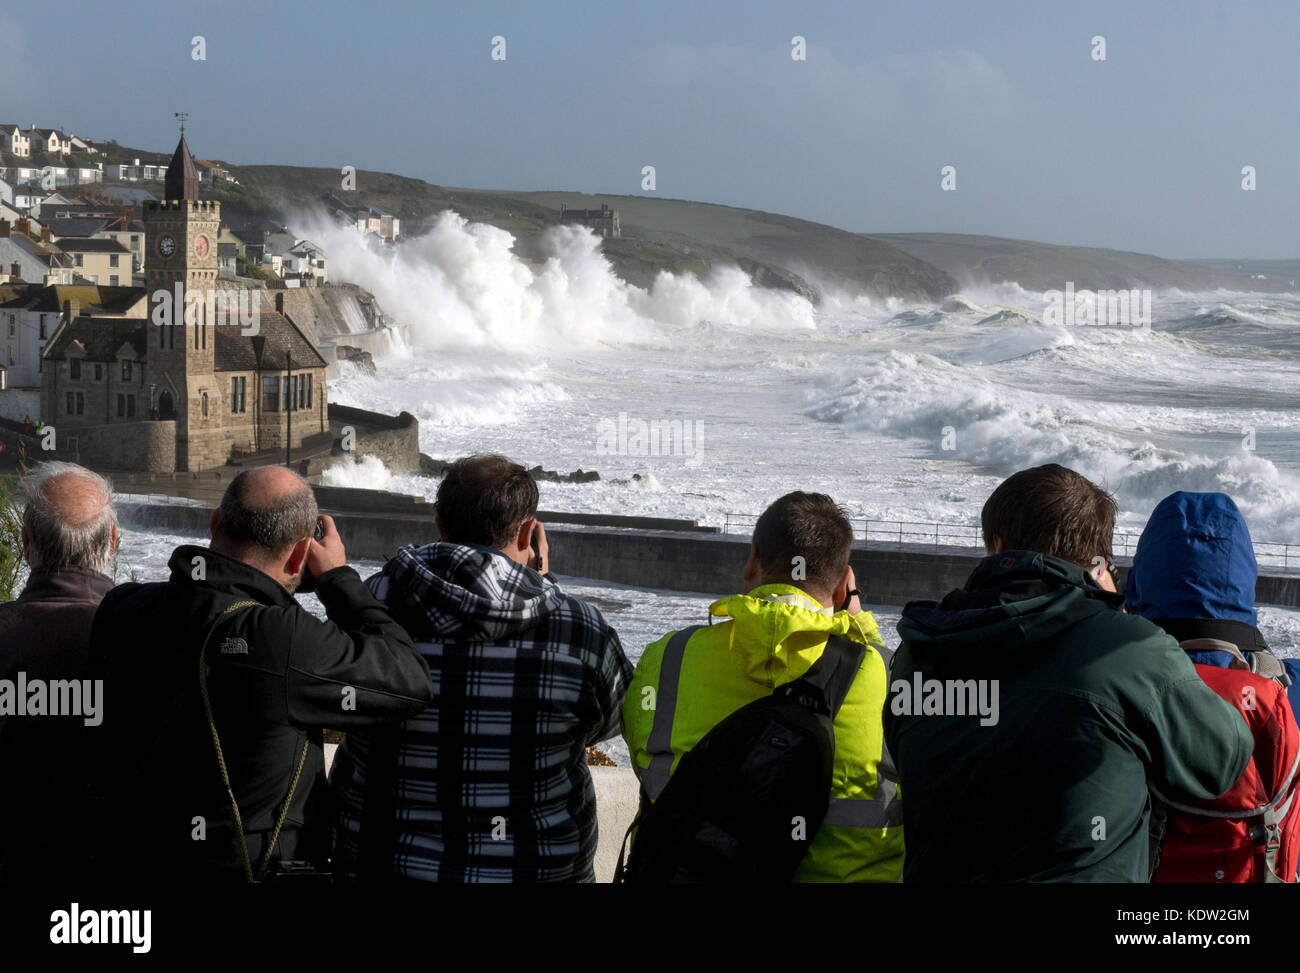 Porthleven, Cornwall. 16th October, 2017. Storm watchers gather at high tide in Porthleven during Hurricane Ophelia Credit: Bob Sharples/Alamy Live News Stock Photo